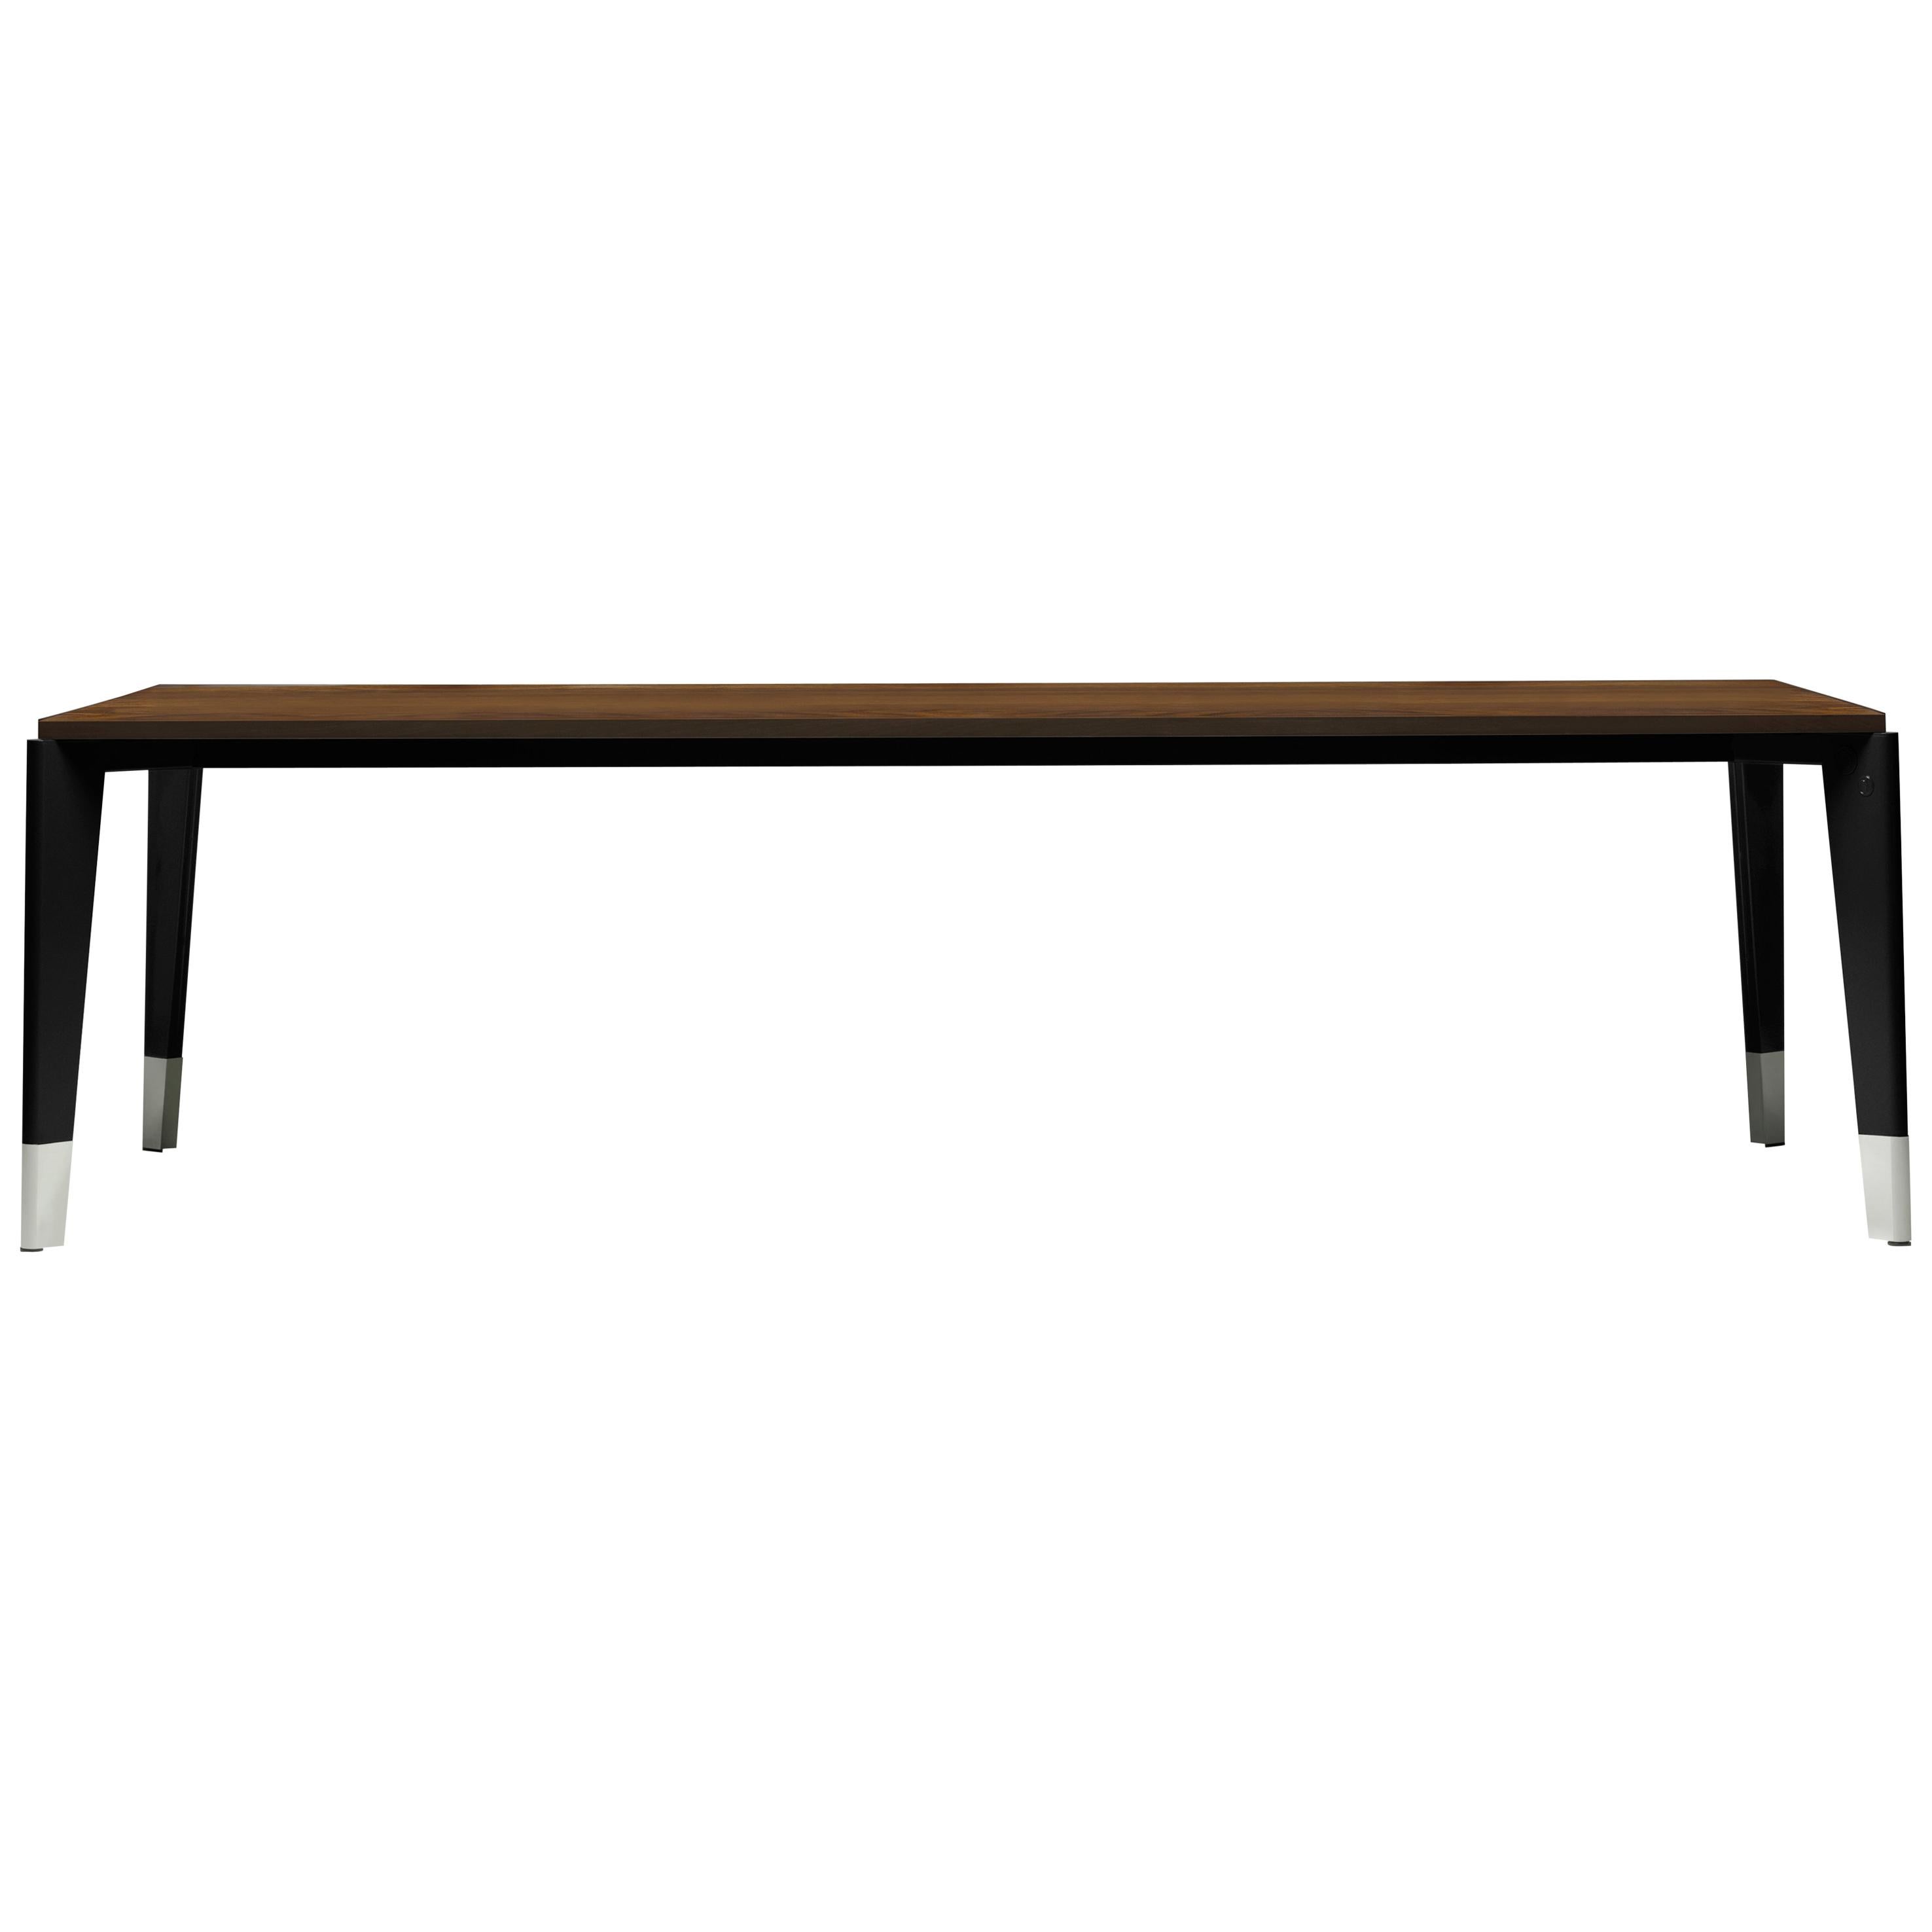 Vitra Flavigny Table in American Walnut Oak by Jean Prouvé For Sale